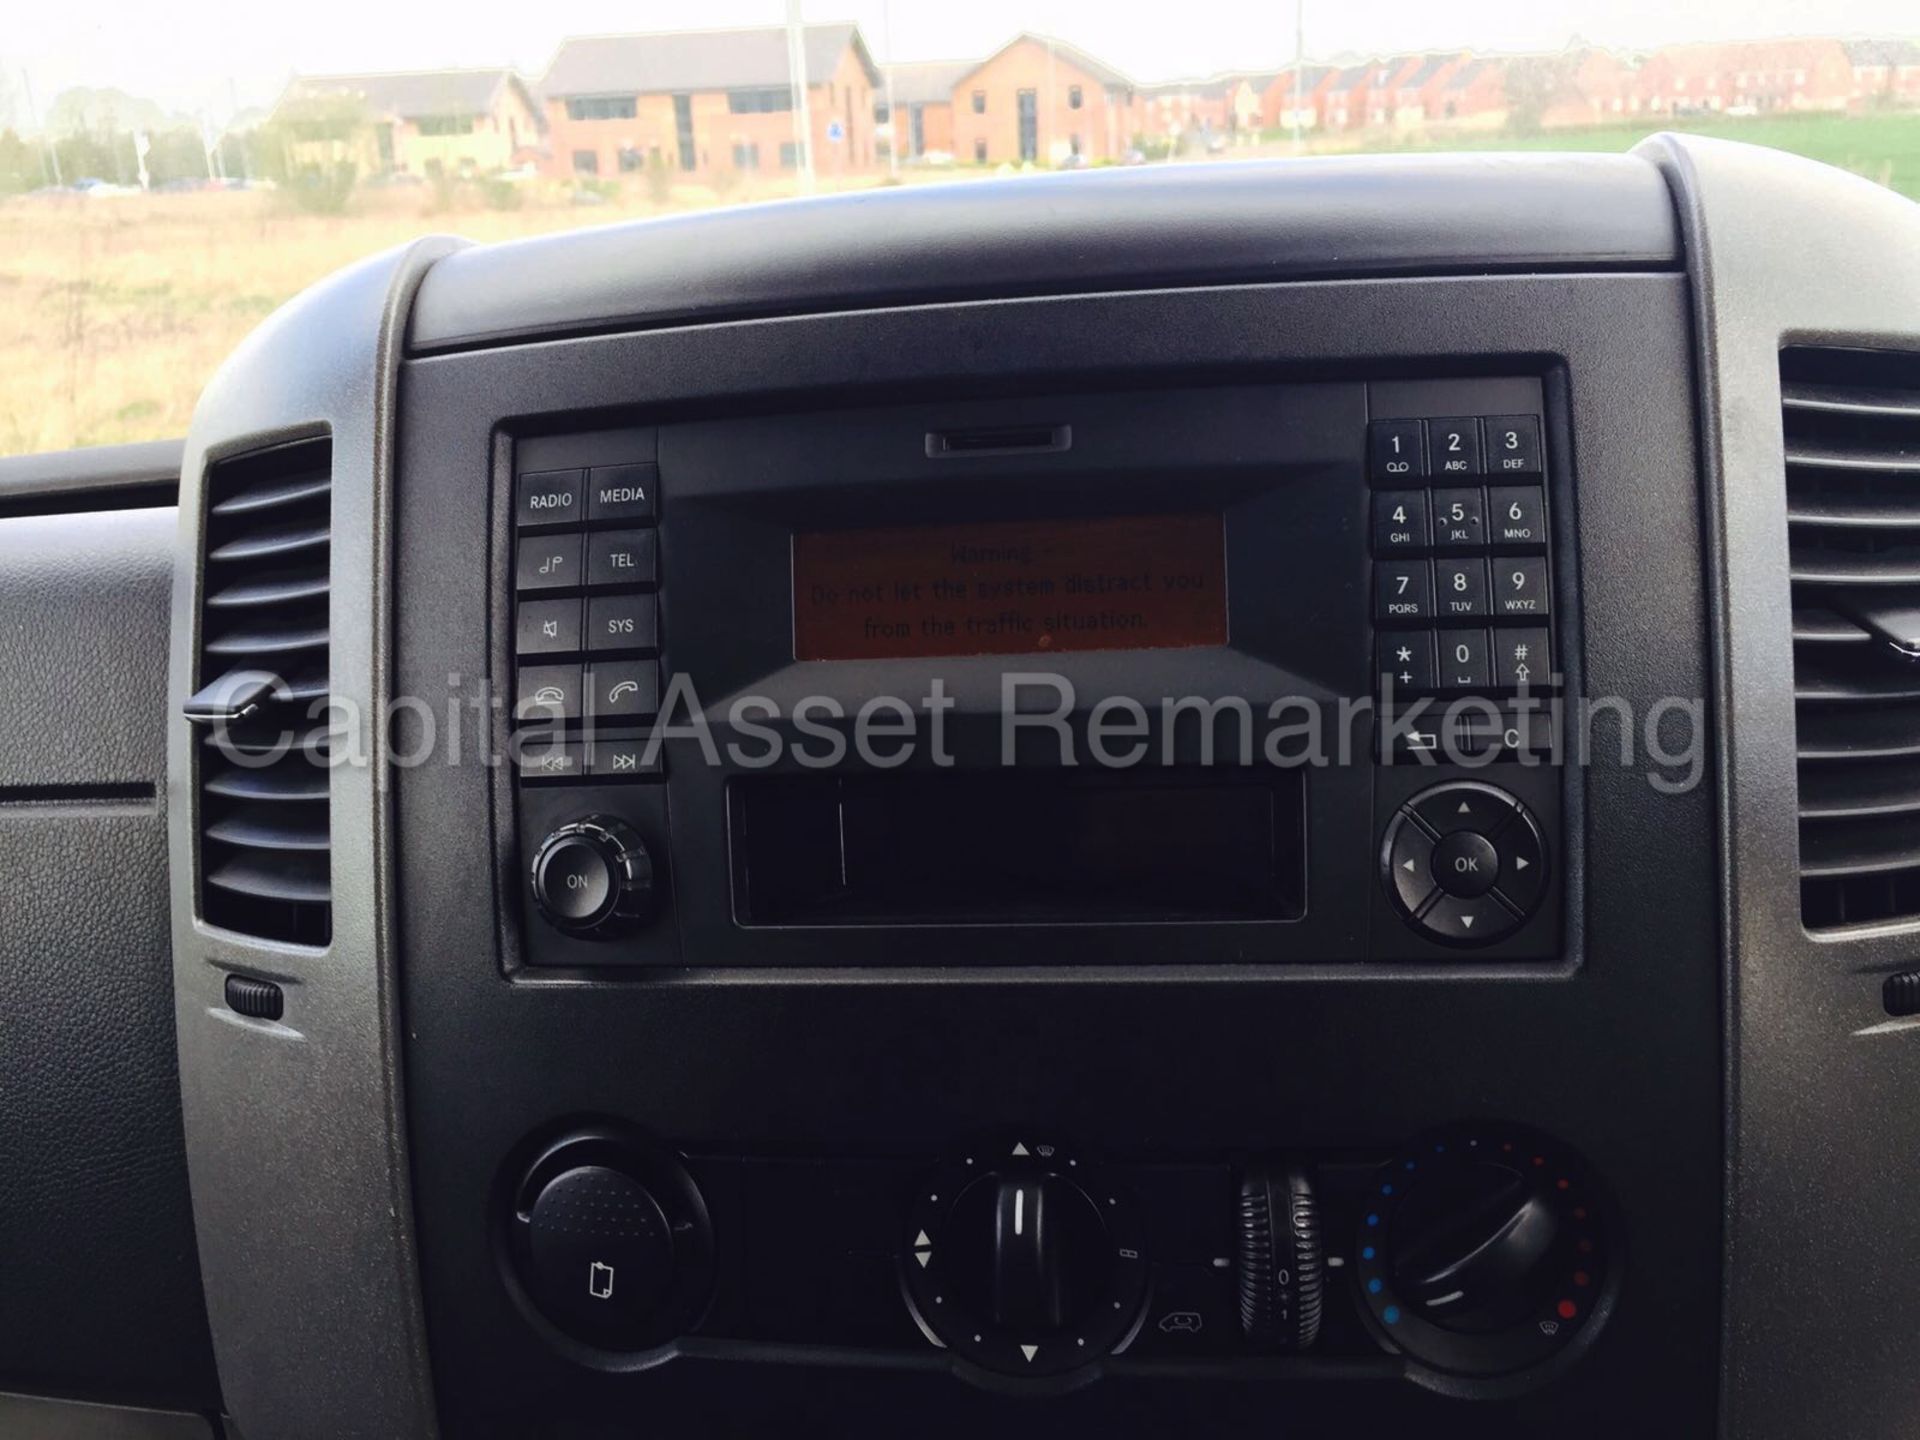 MERCEDES SPRINTER 313CDI "130BHP - 6 SPEED" FACELIFT MODEL / NEW SHAPE (2014 YEAR) 1 OWNER - Image 9 of 11